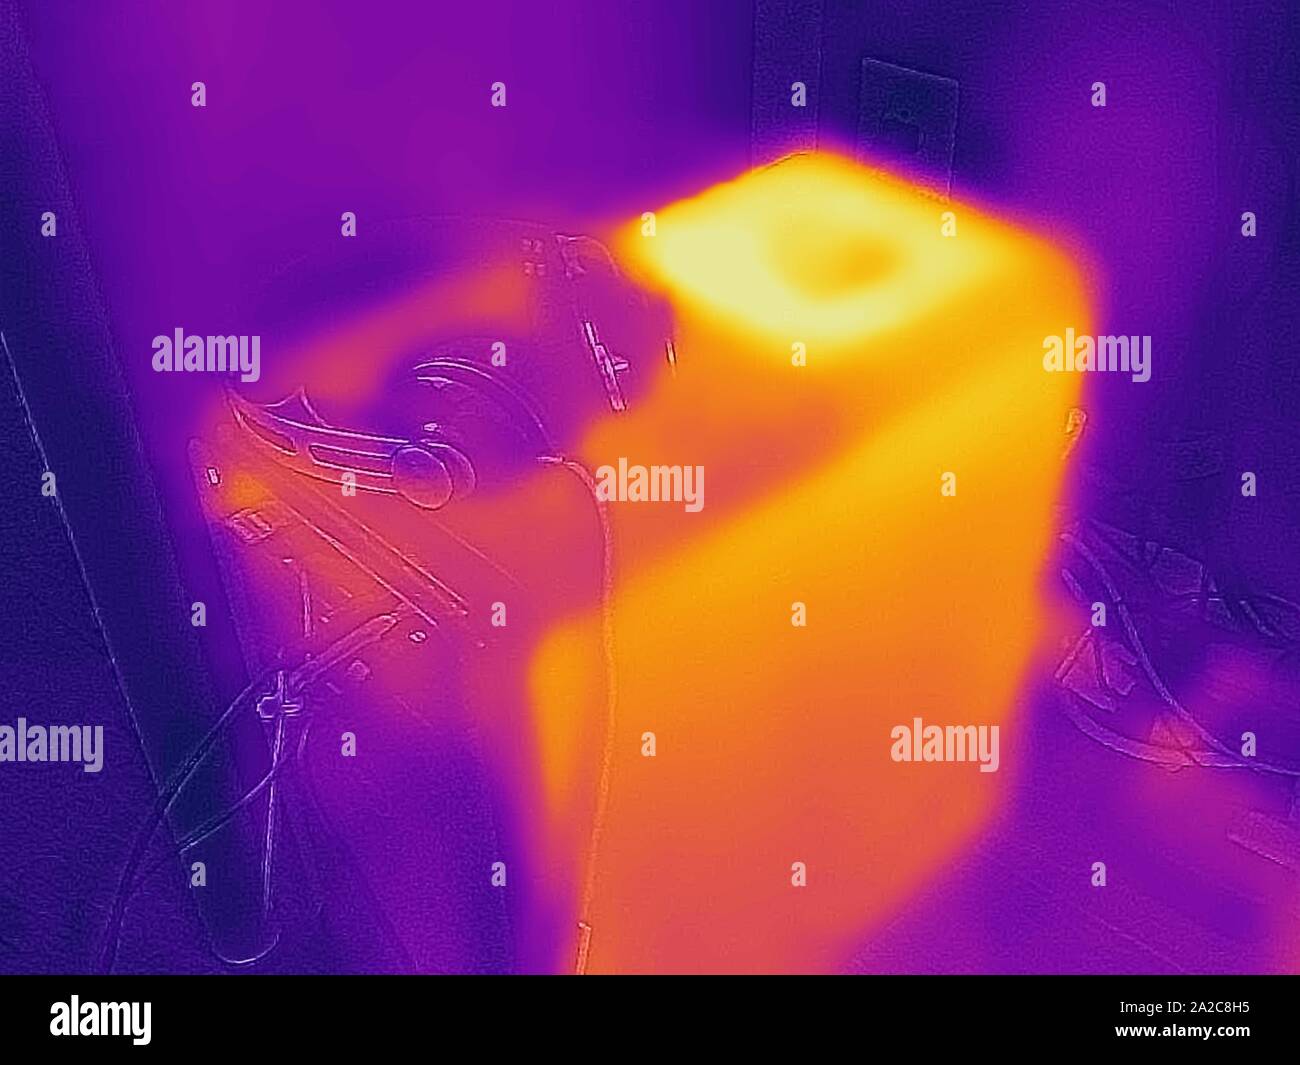 Thermal camera thermographic image, with light areas corresponding to higher temperatures, showing waste heat generated by a desktop PC tower during use, San Ramon, California, September, 2019. () Stock Photo